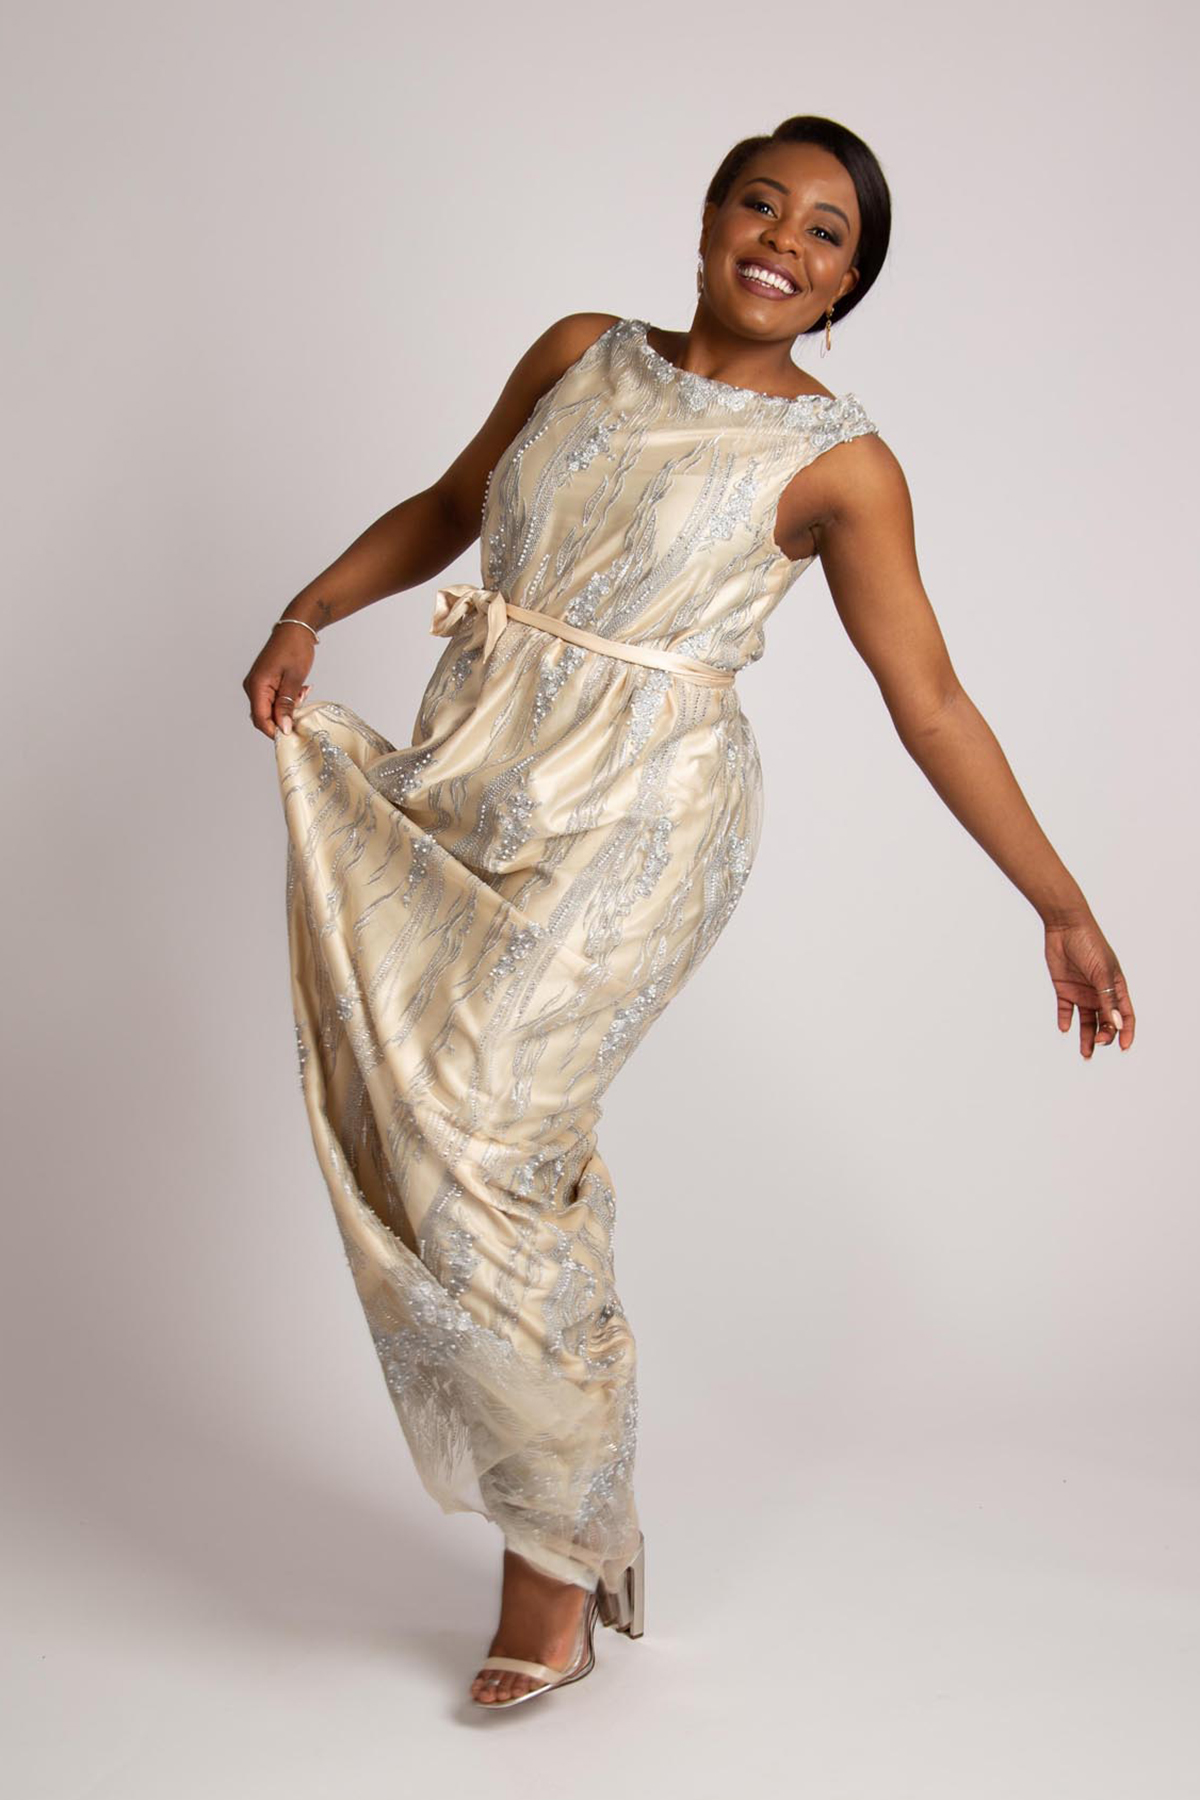 Gabriella Kalema models a pale yellow evening gown with boat neck and ribbon belt made of tulle with embroidery.